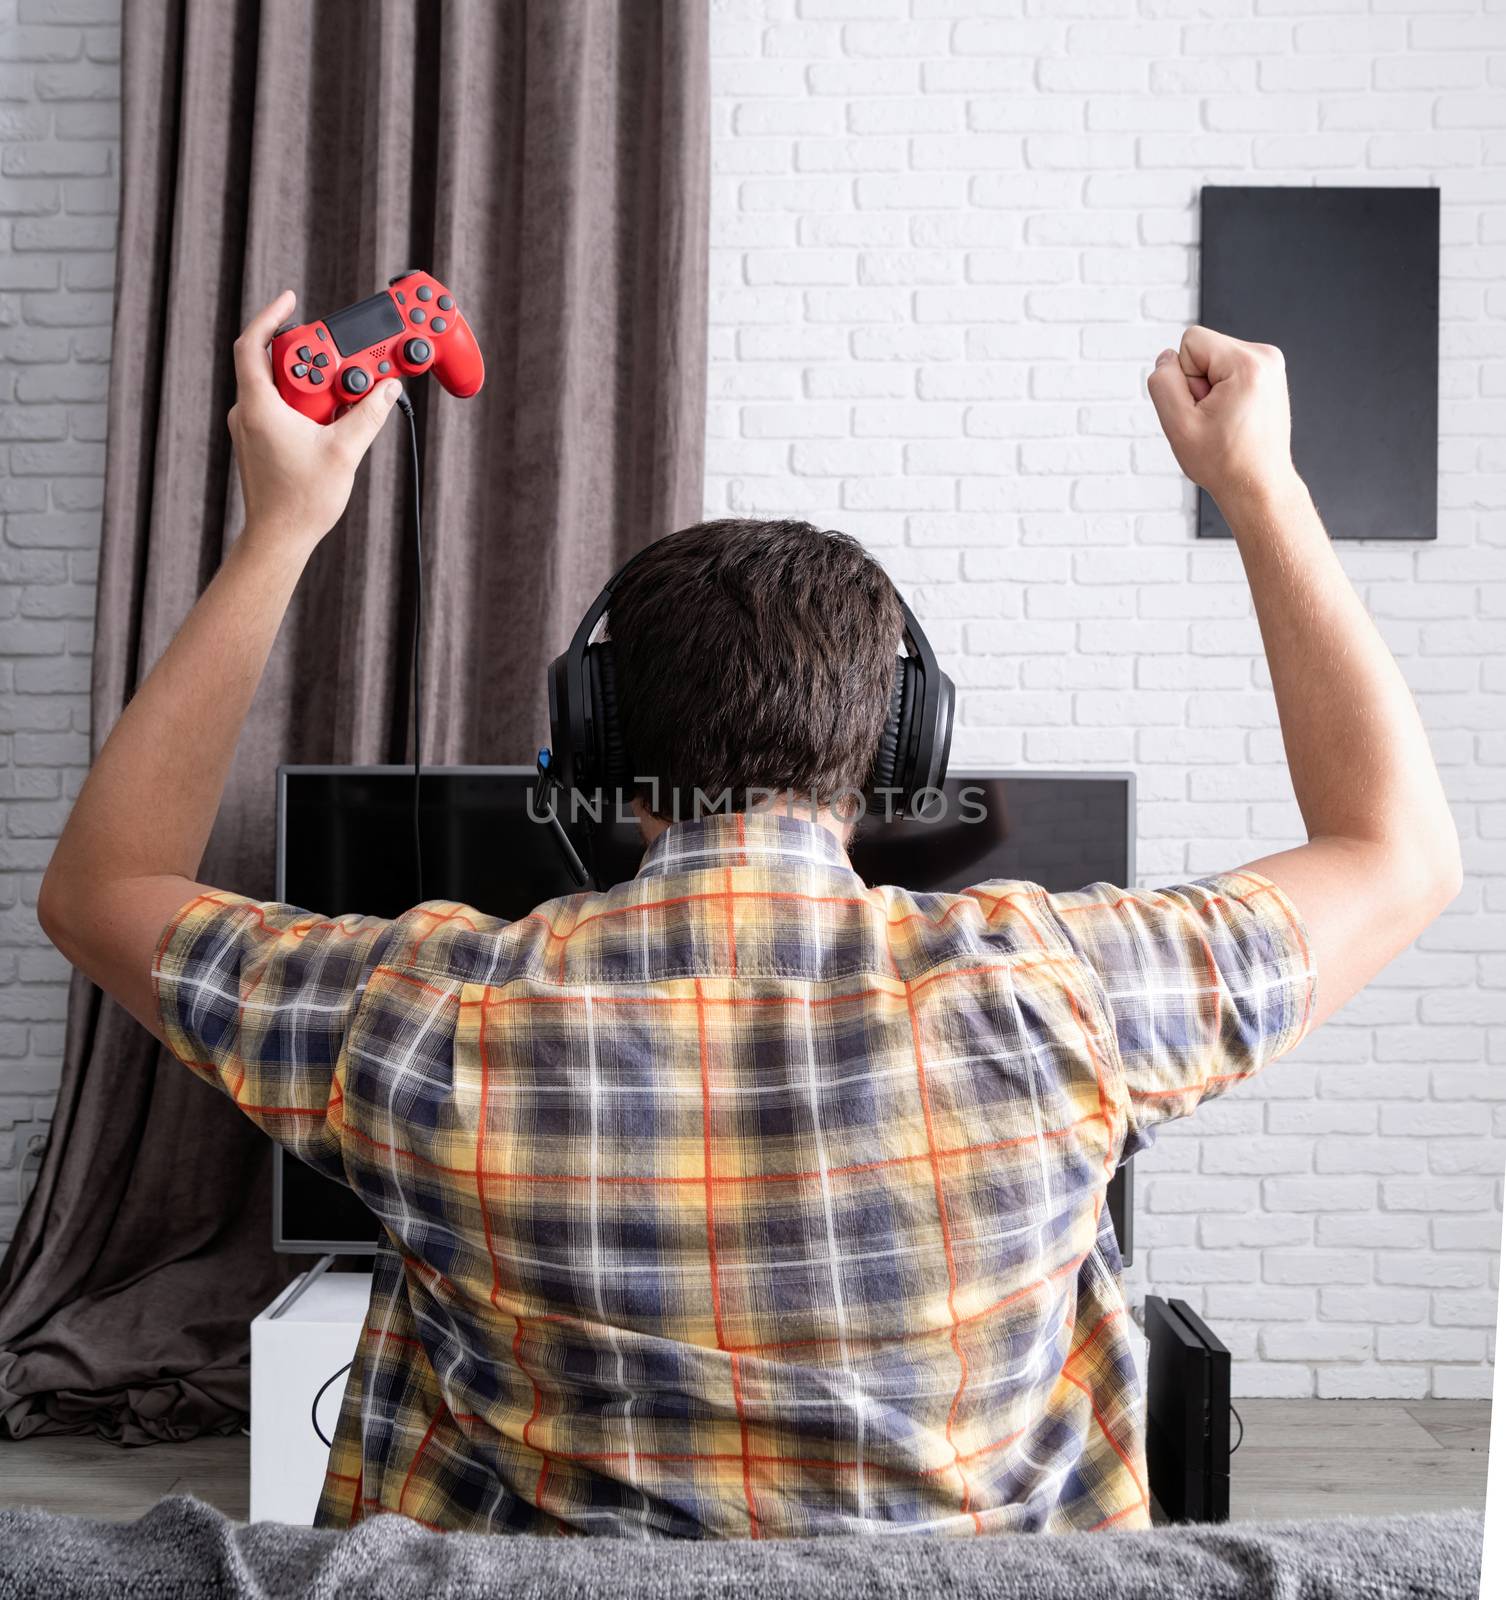 Stay home. Rear view of a young man playing video games at home